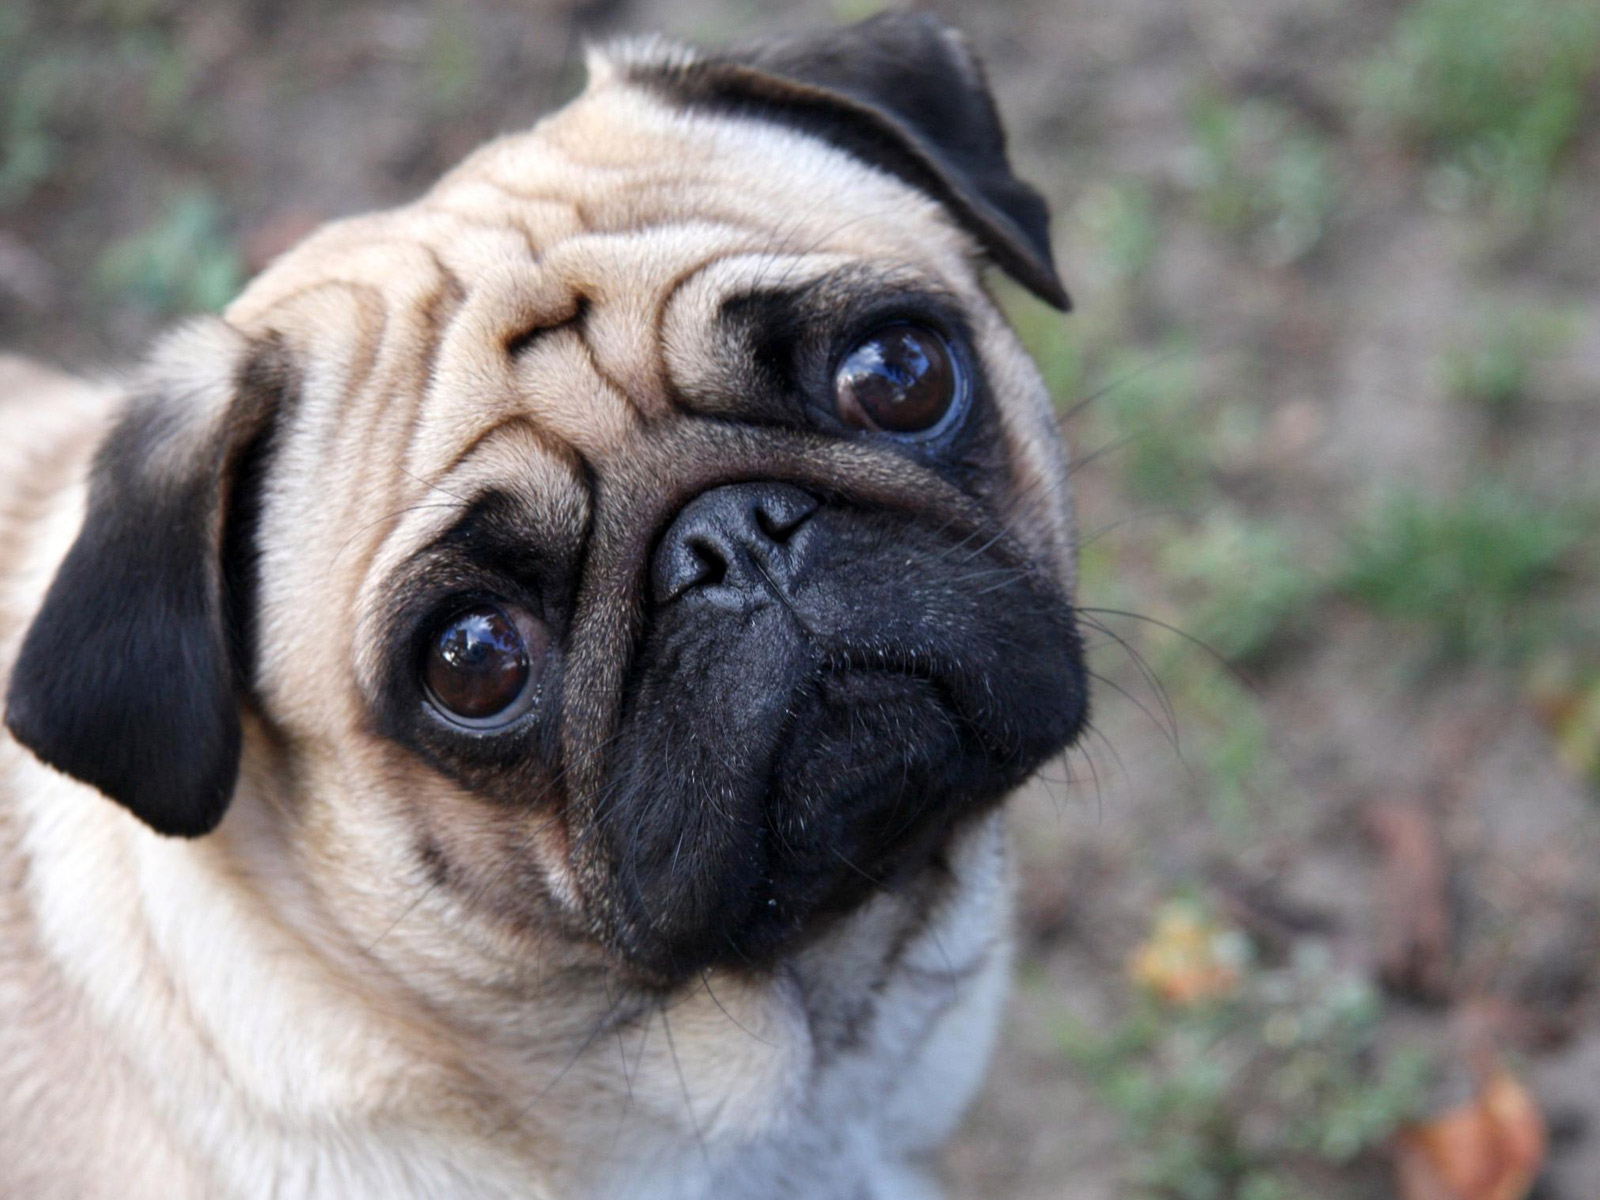 Cute Pug Dog Photo And Wallpaper Beautiful Pictures